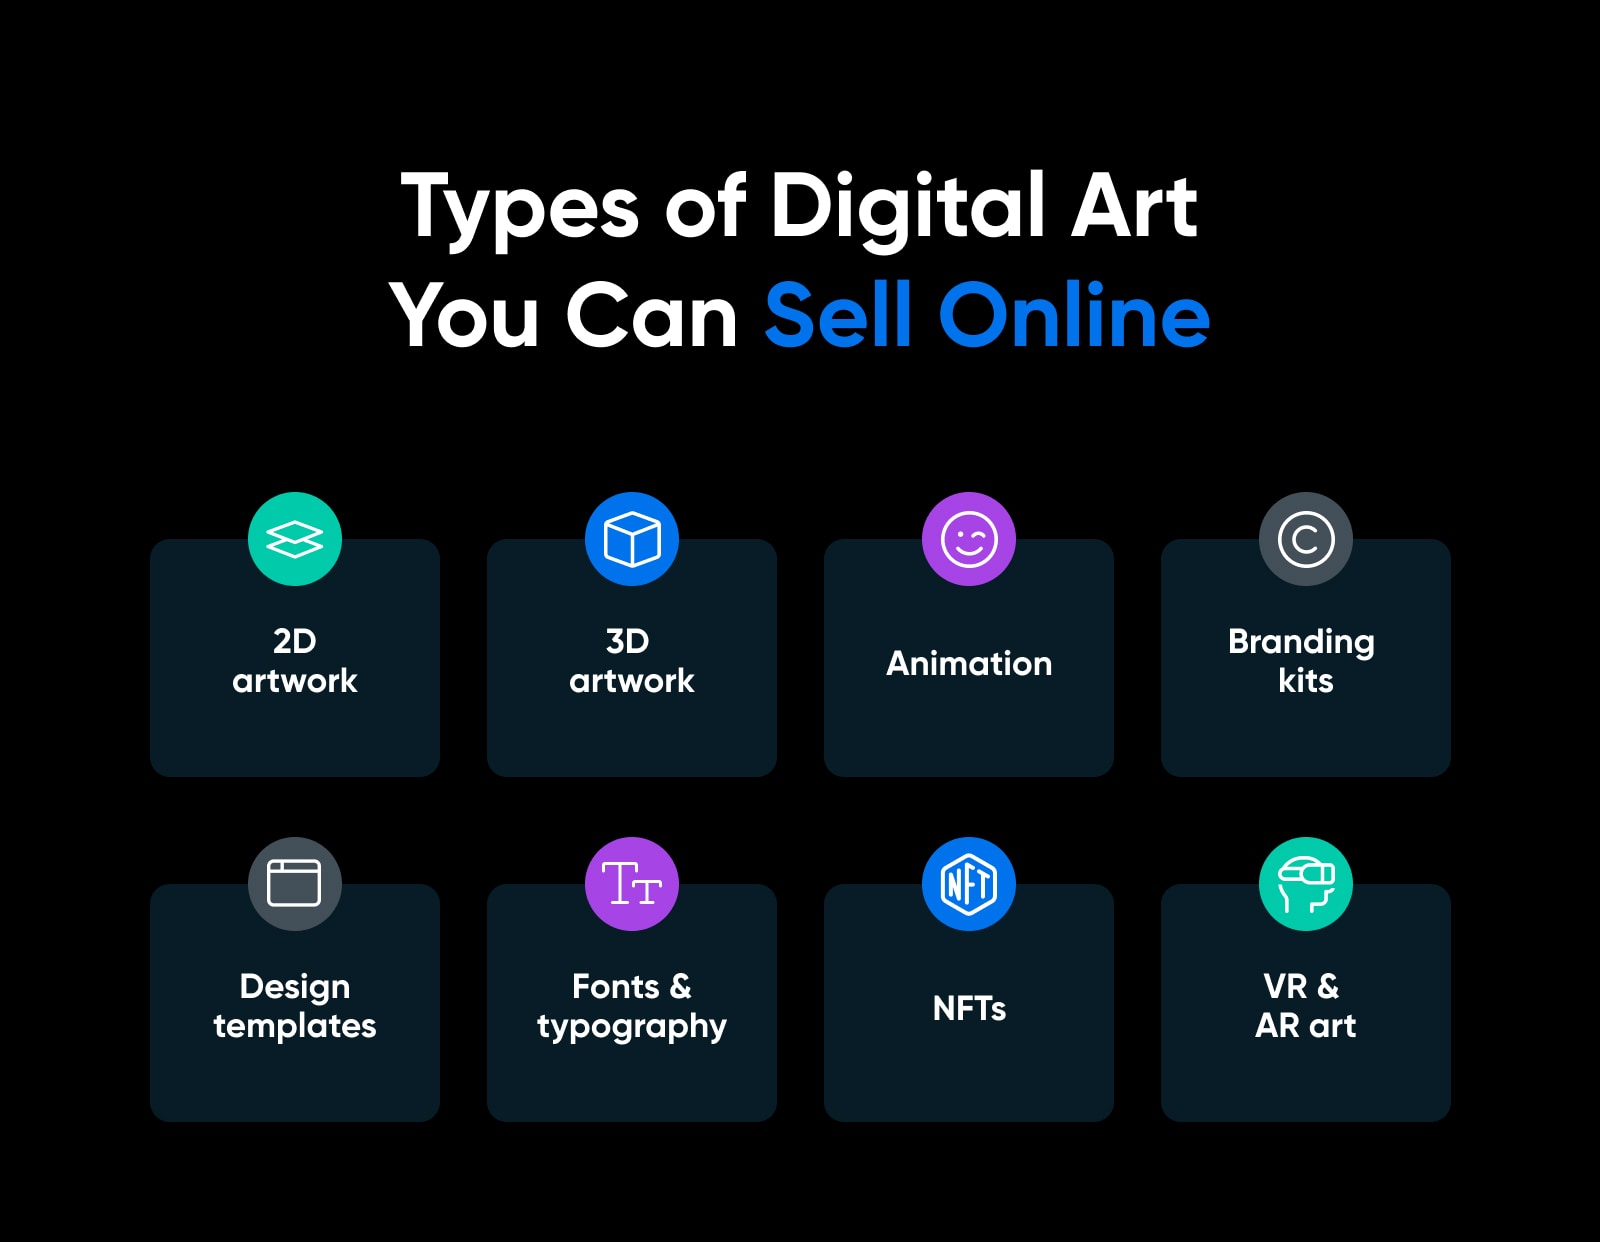 Types of Digital Art You Can Sell Online